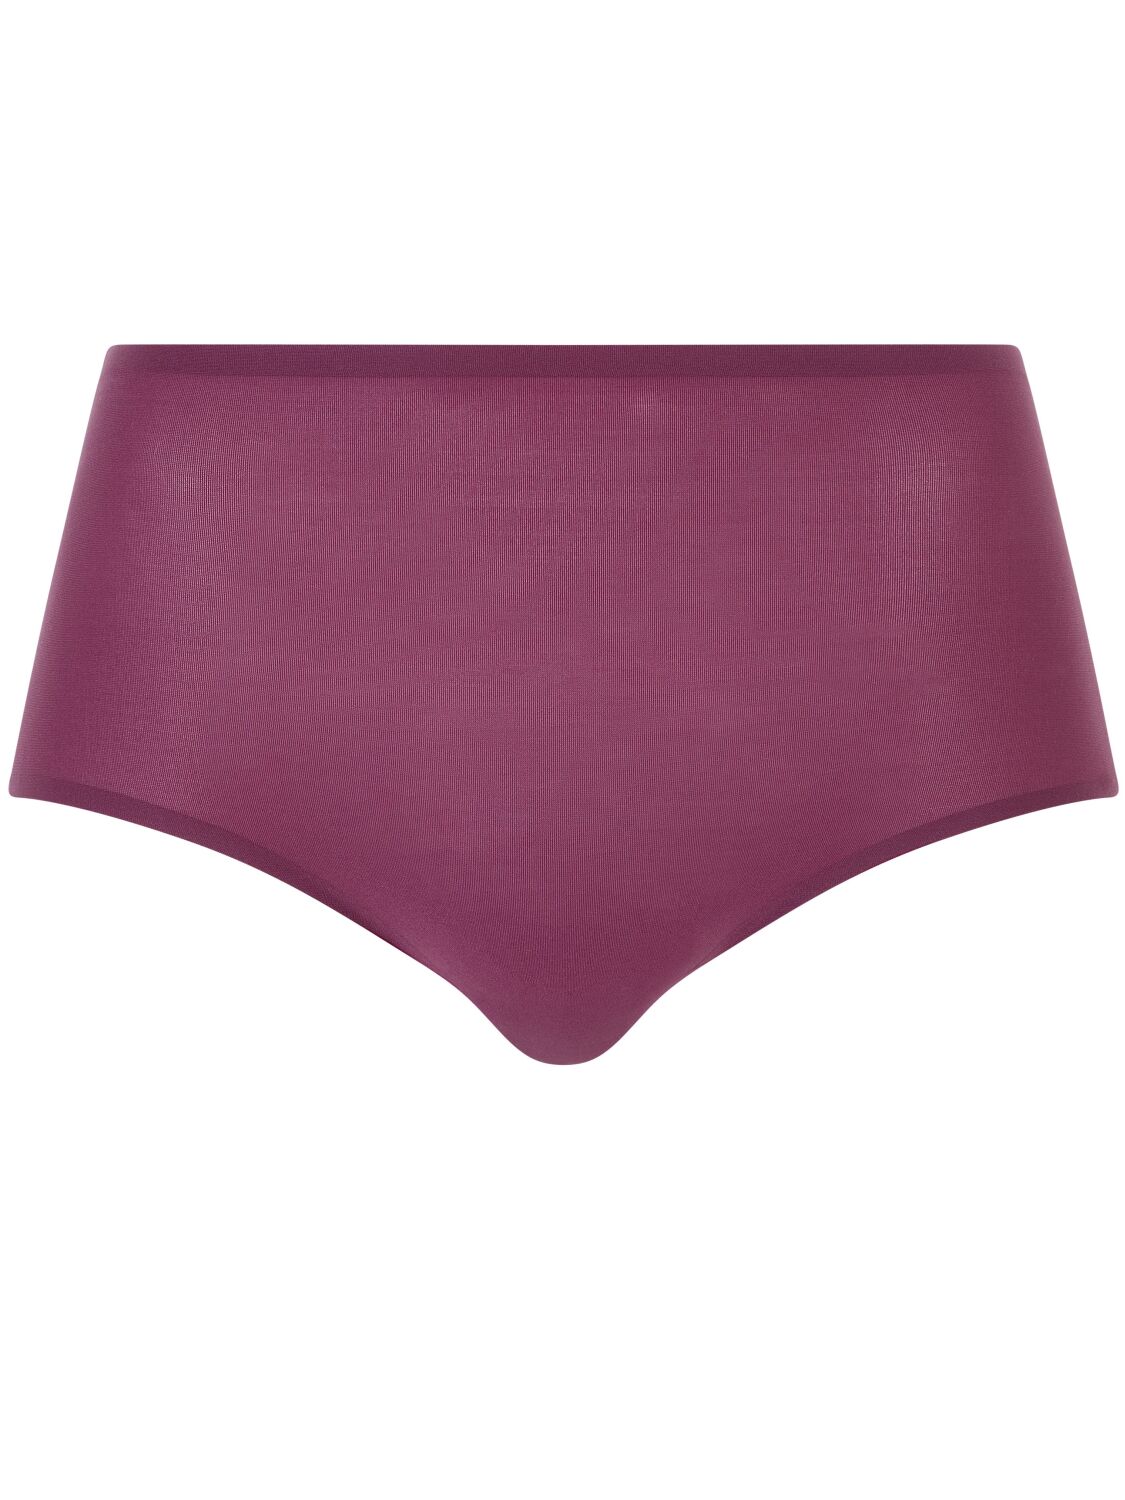 Chantelle Taillenslip ONE SIZE SoftStretch Farbe Tannin